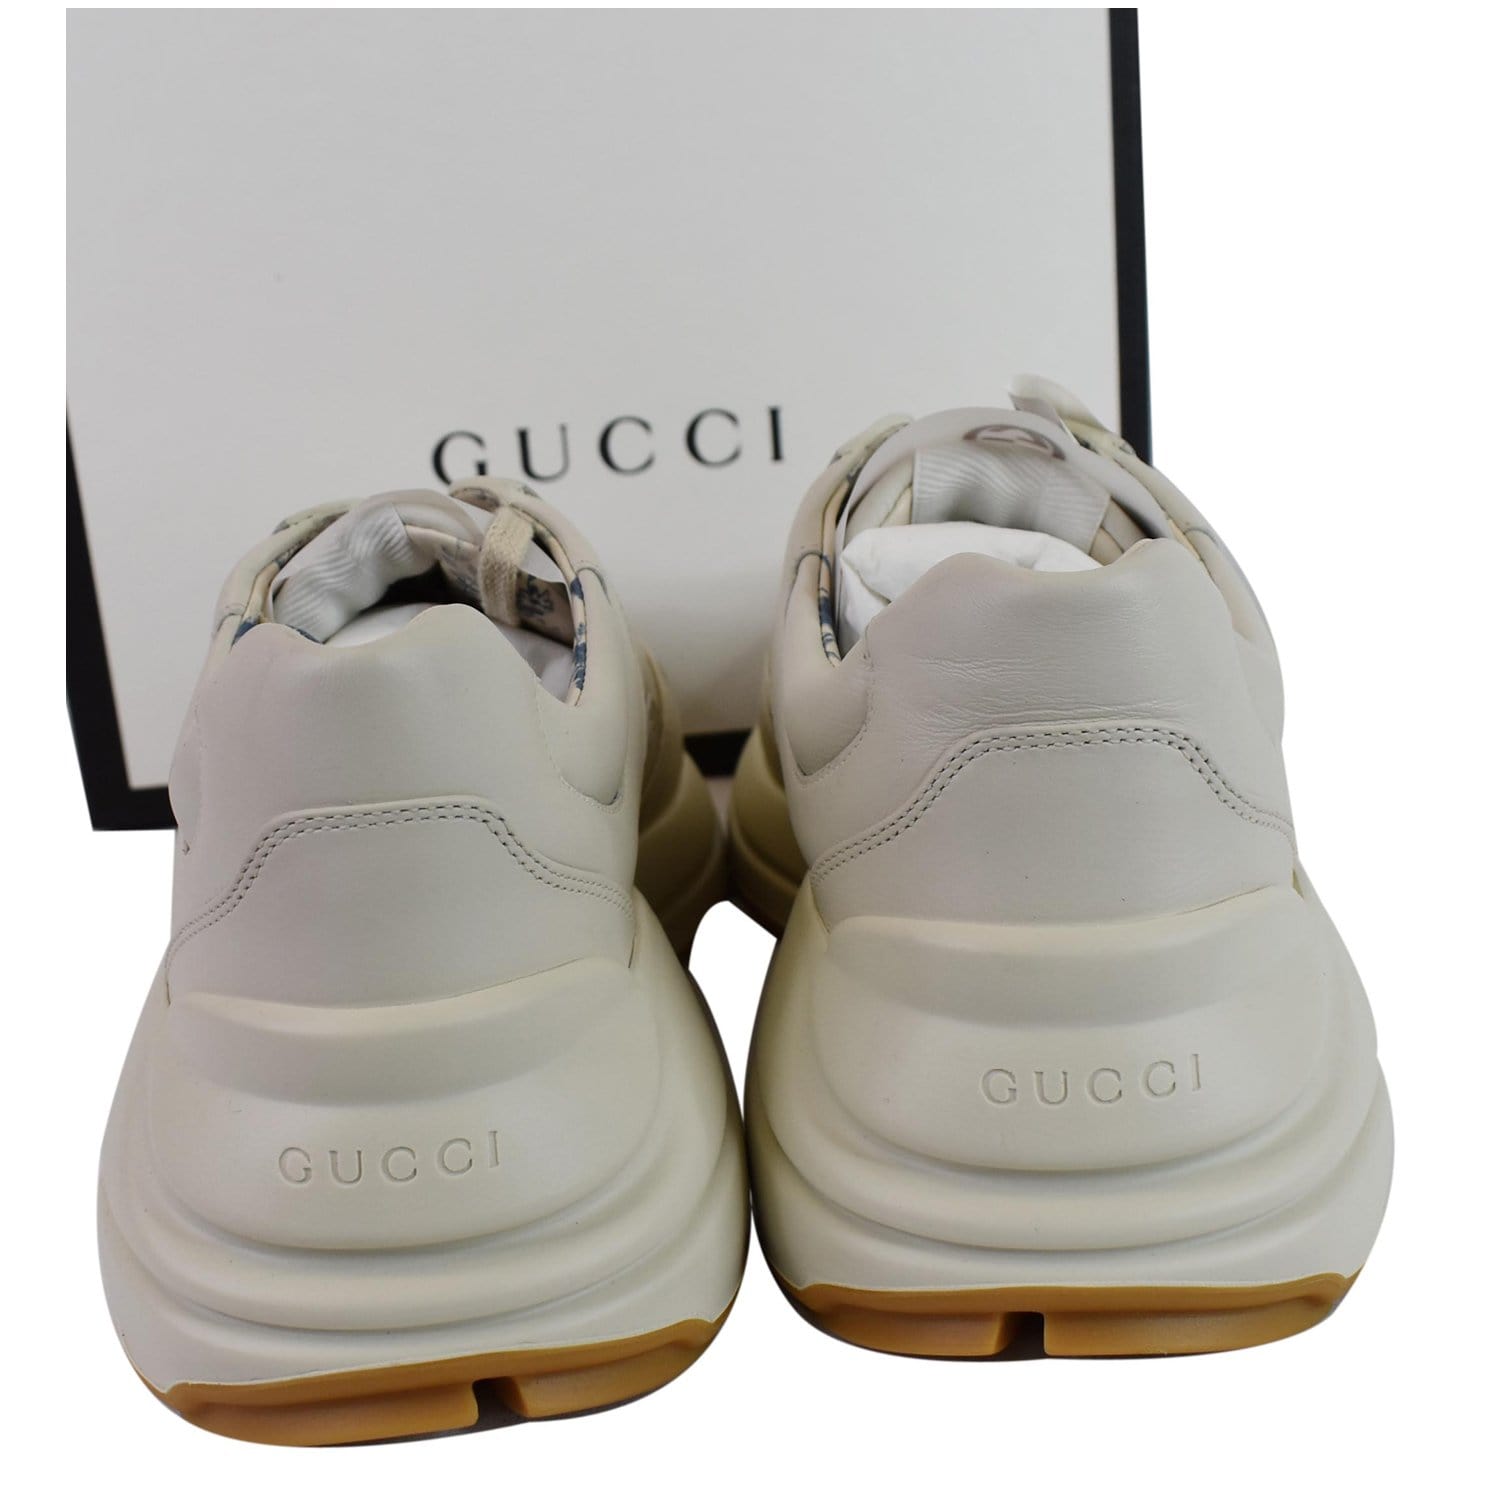 Gucci Rhyton NY Yankees Leather Sneakers White 548638 US 7